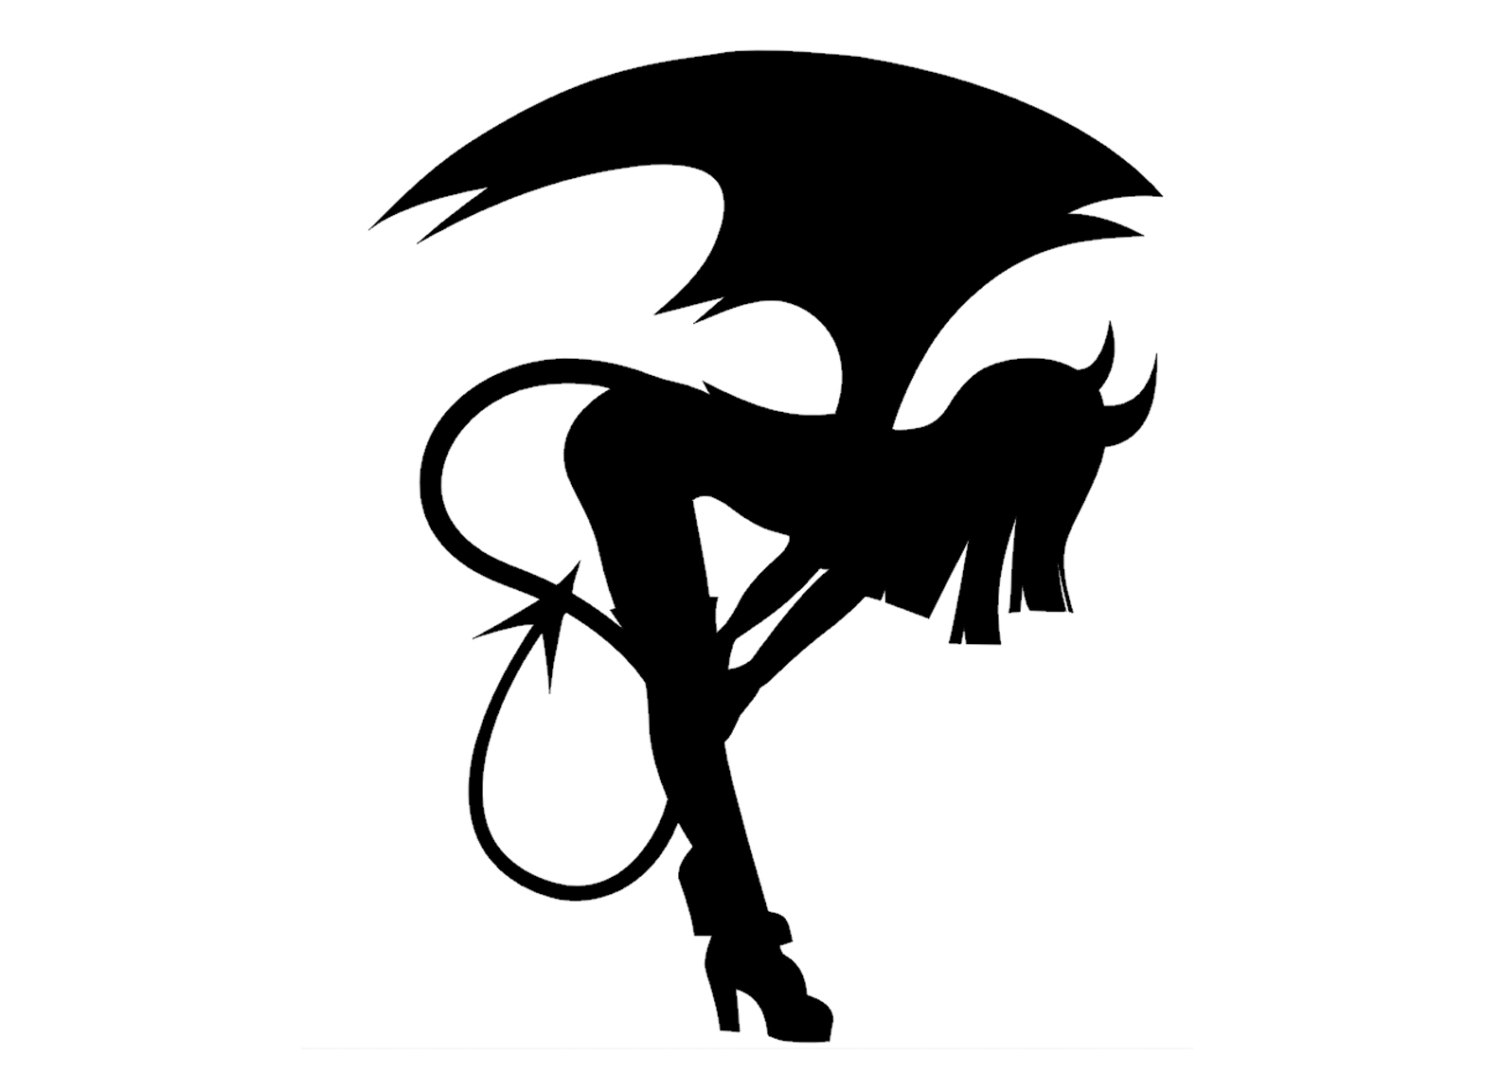 Succubus clipart #9, Download drawings